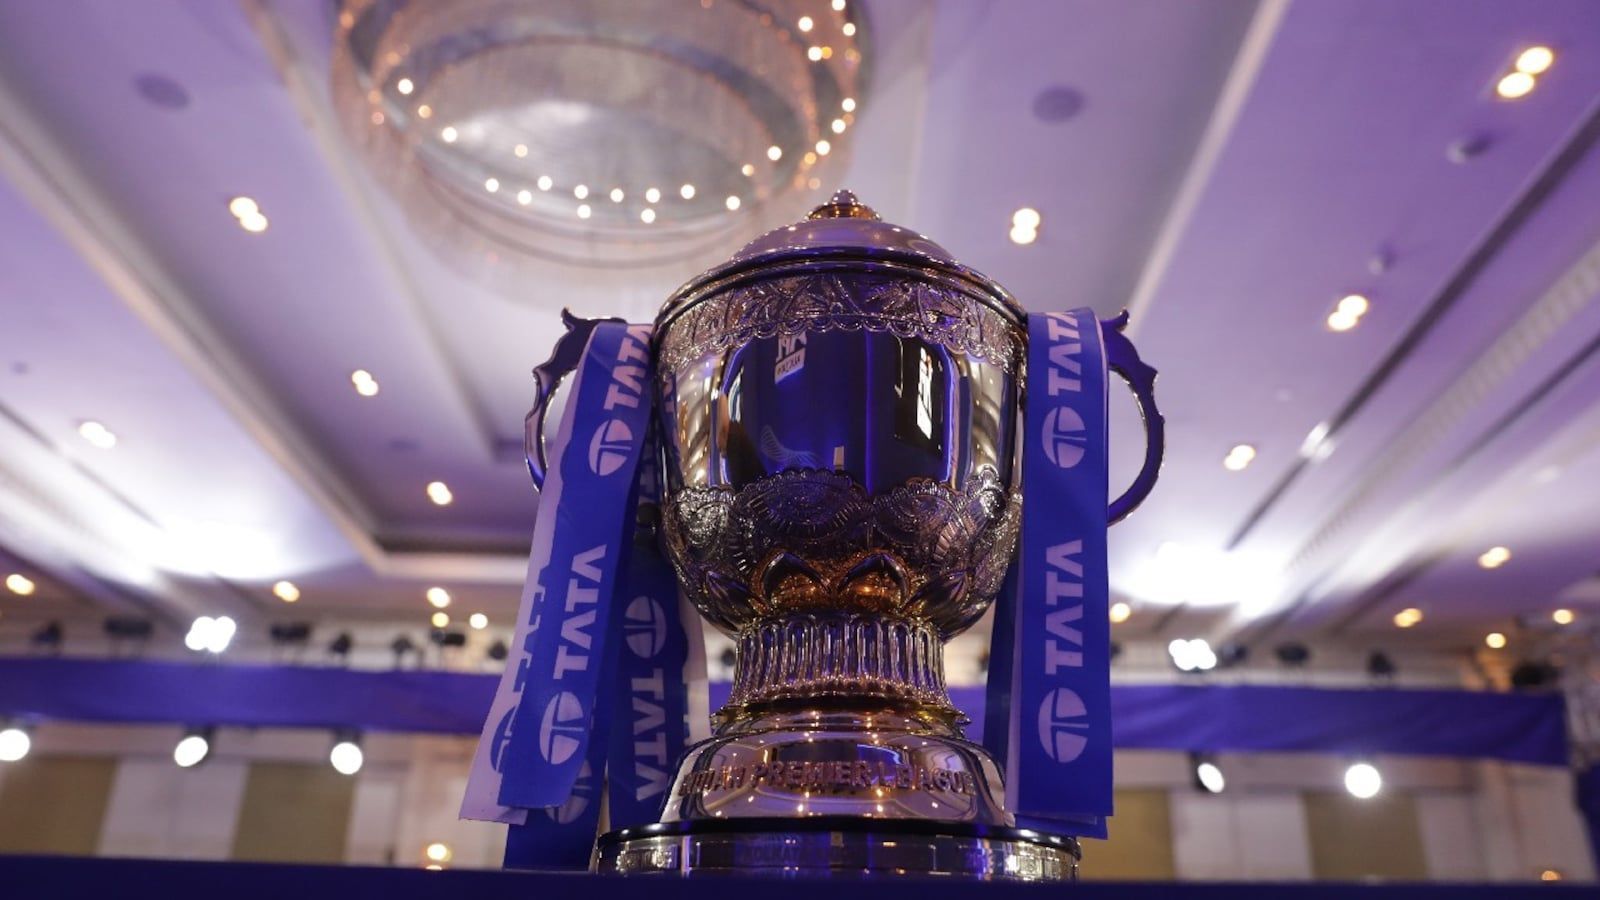 The Tata IPL Auction is set to take place on 23rd December